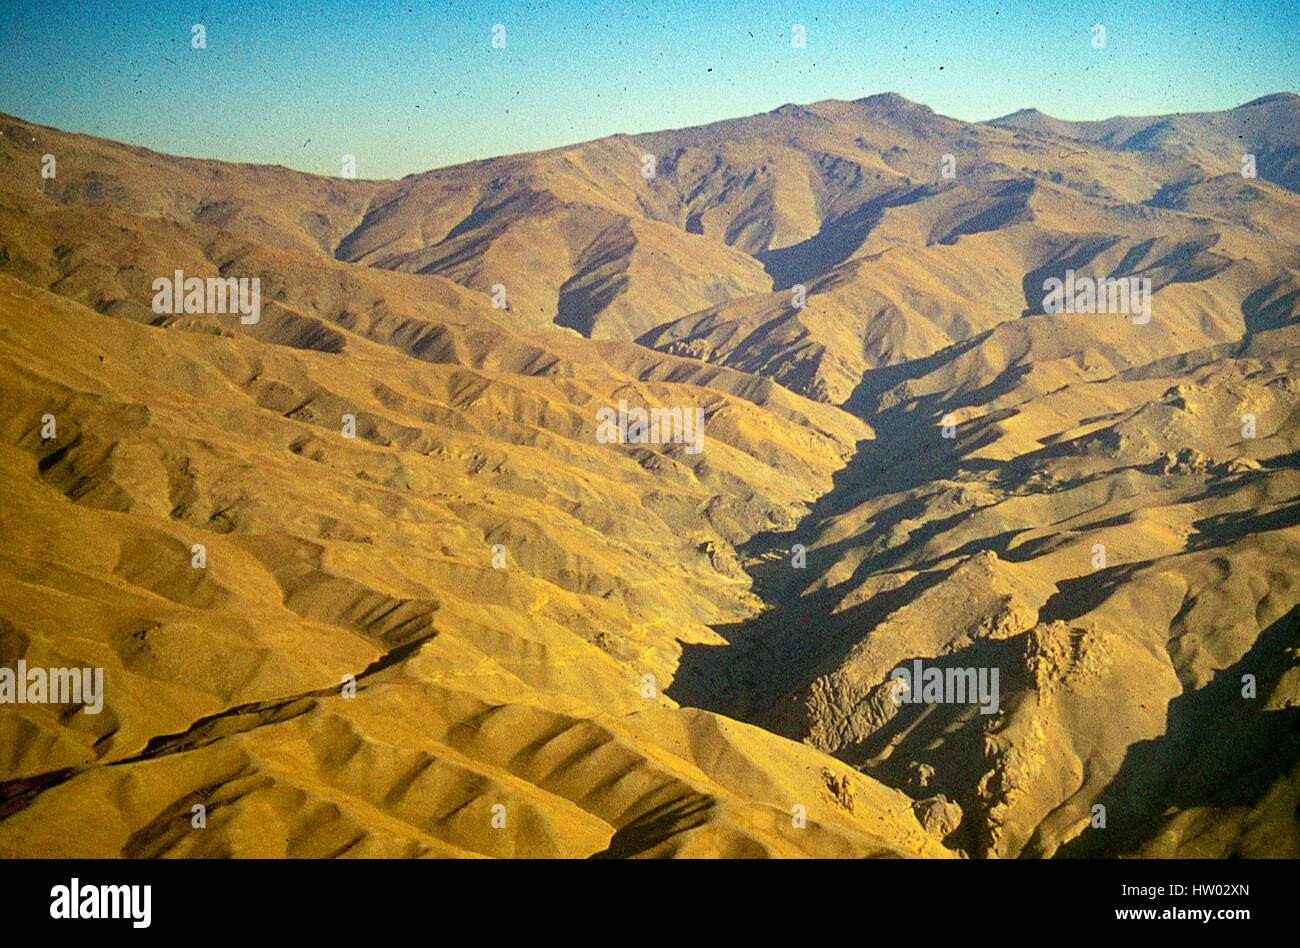 Panoramic aerial view from a flight over the Hindu Kush mountains surrounding the Bamiyan valley, in the Hazarajat region of central Afghanistan, November, 1975. Stock Photo